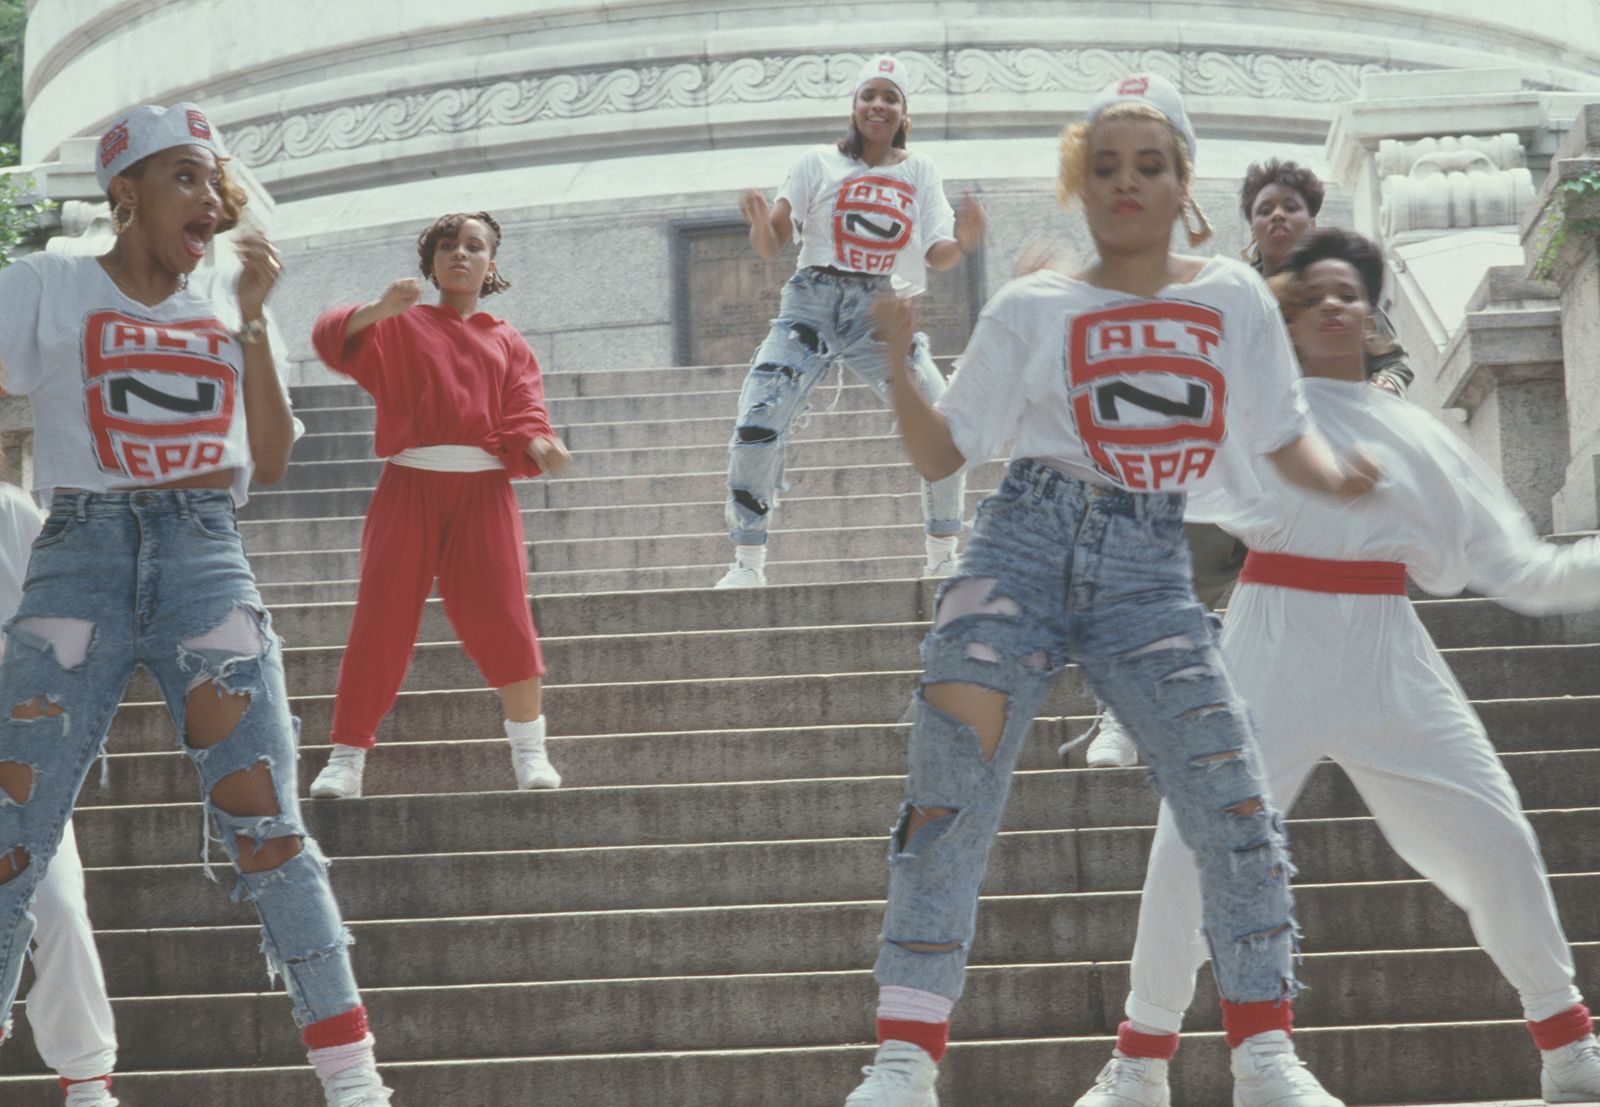 These 1980s Movies Had the Boldest '80s Fashion